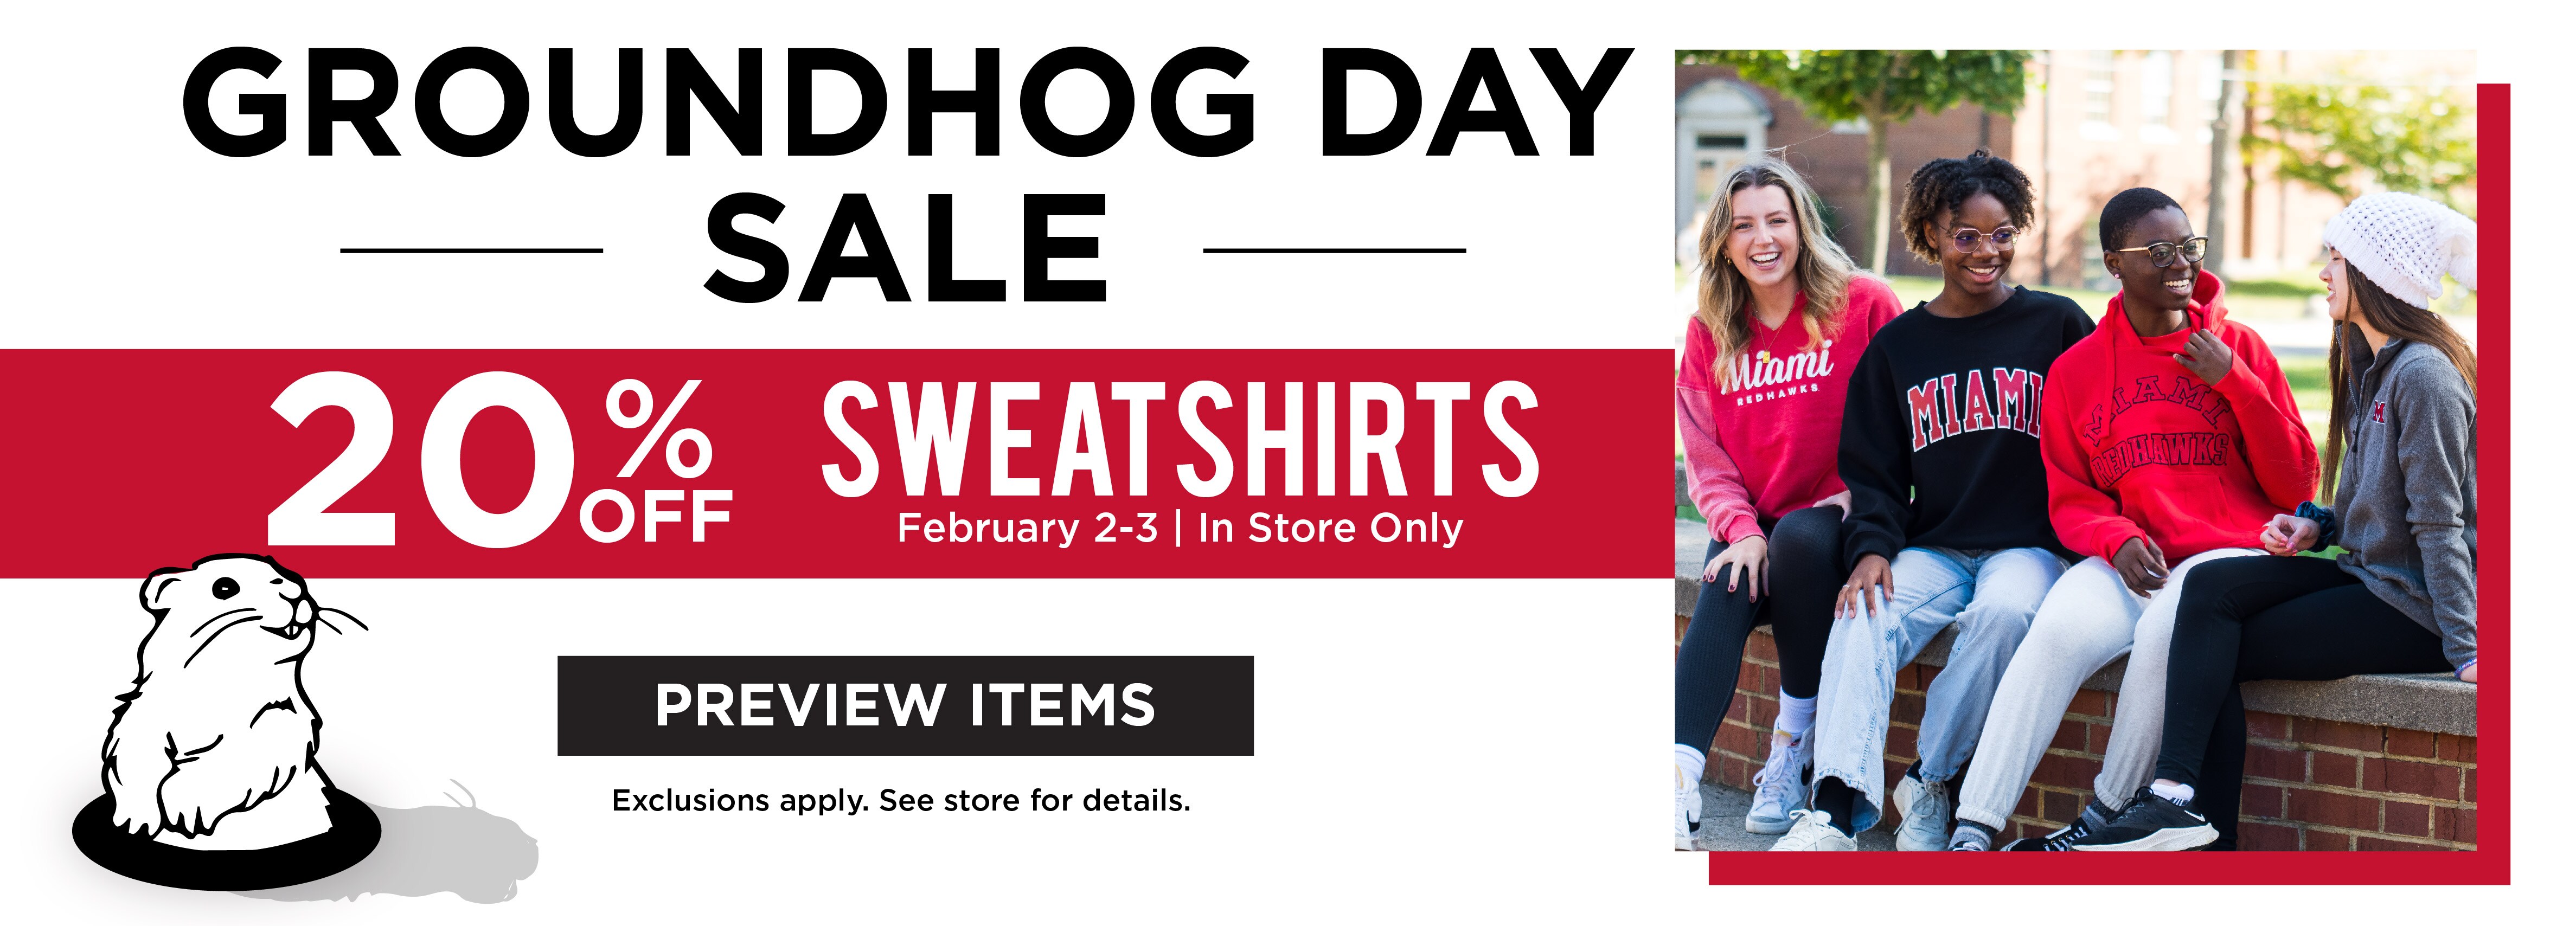 Groundhog Day Sale 20% Off Sweatshirts February 2-3 In Store Only Preview Items Exclusions apply. See store for details.